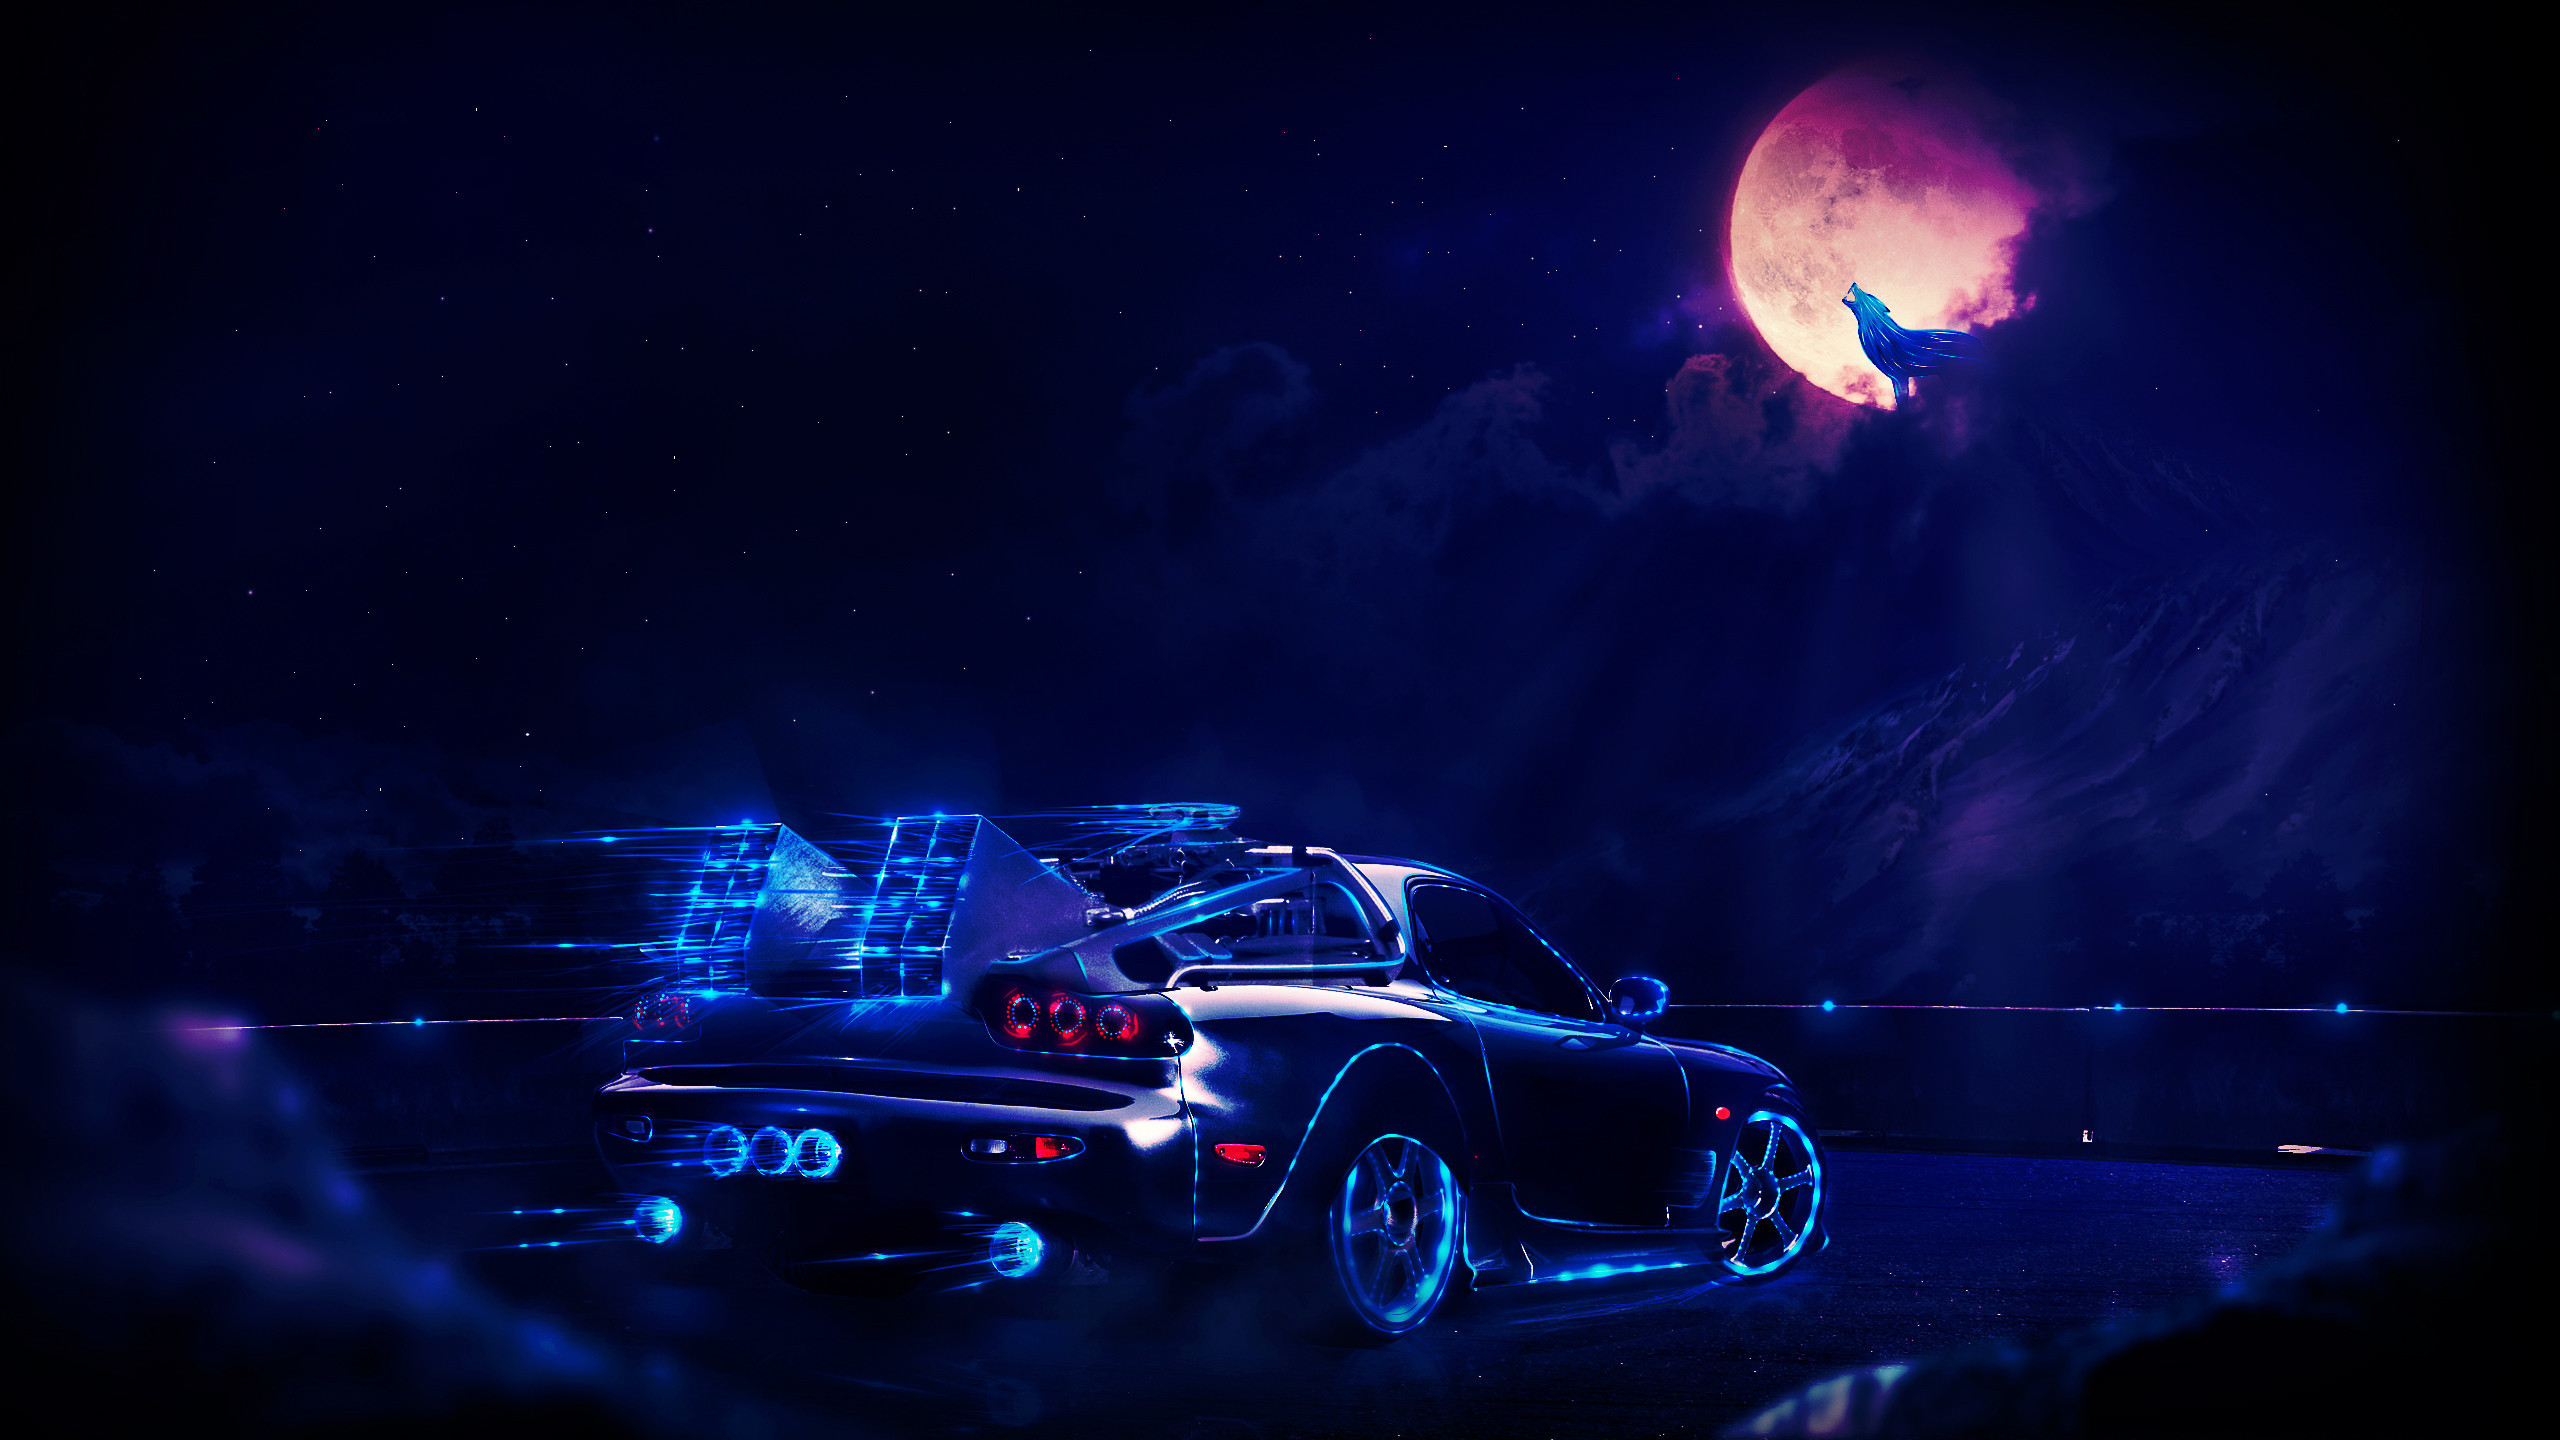 Back To The Future Machine Wolf Night Neon Photoshop Mazda Images, Photos, Reviews